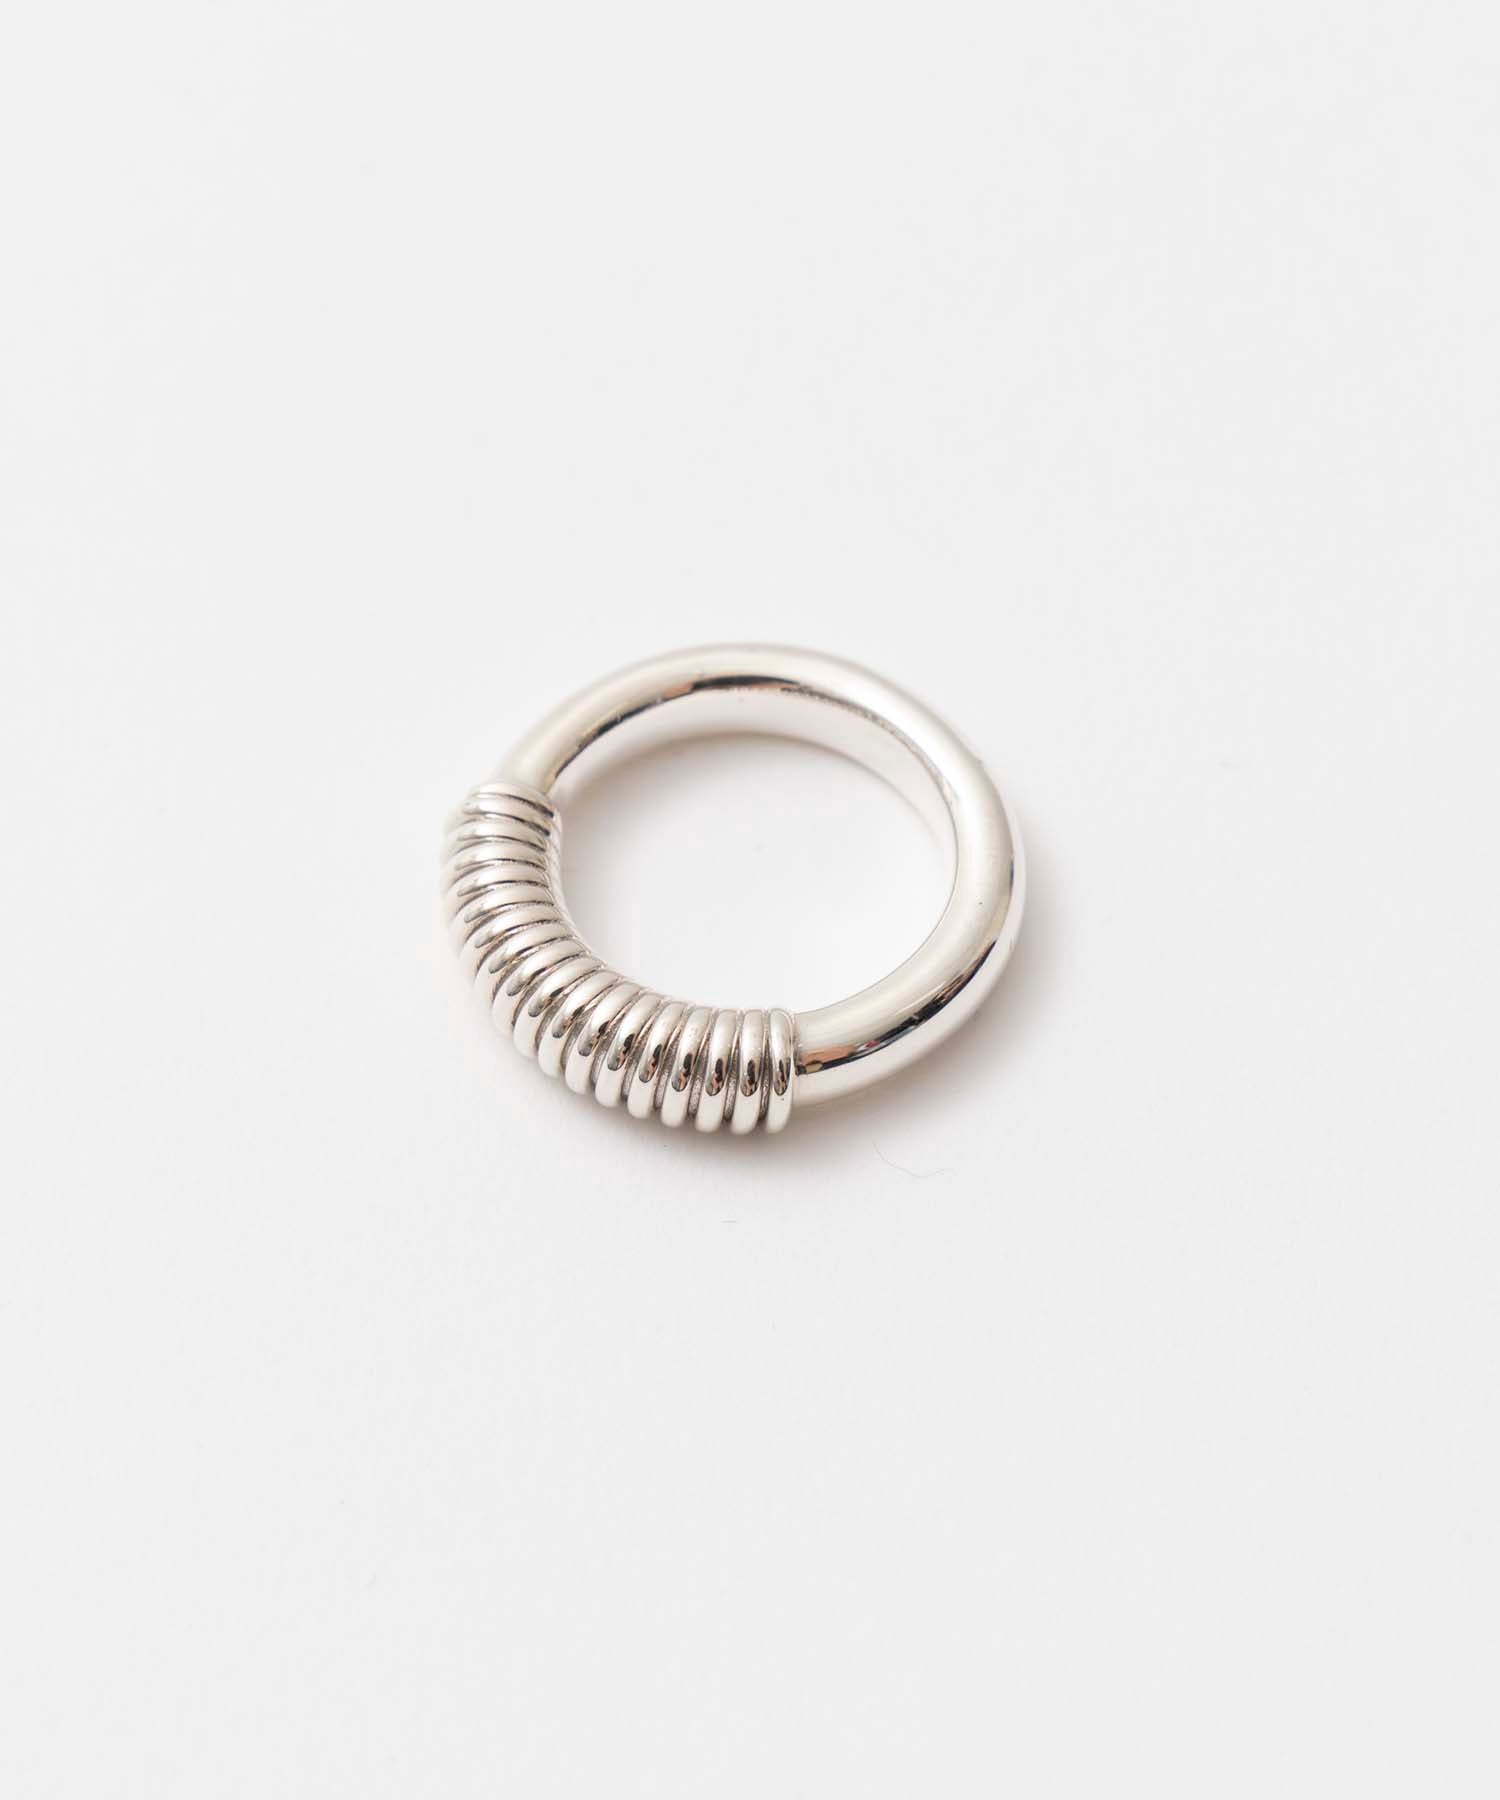 【hacot by MAISON SPECIAL】Spring Ring